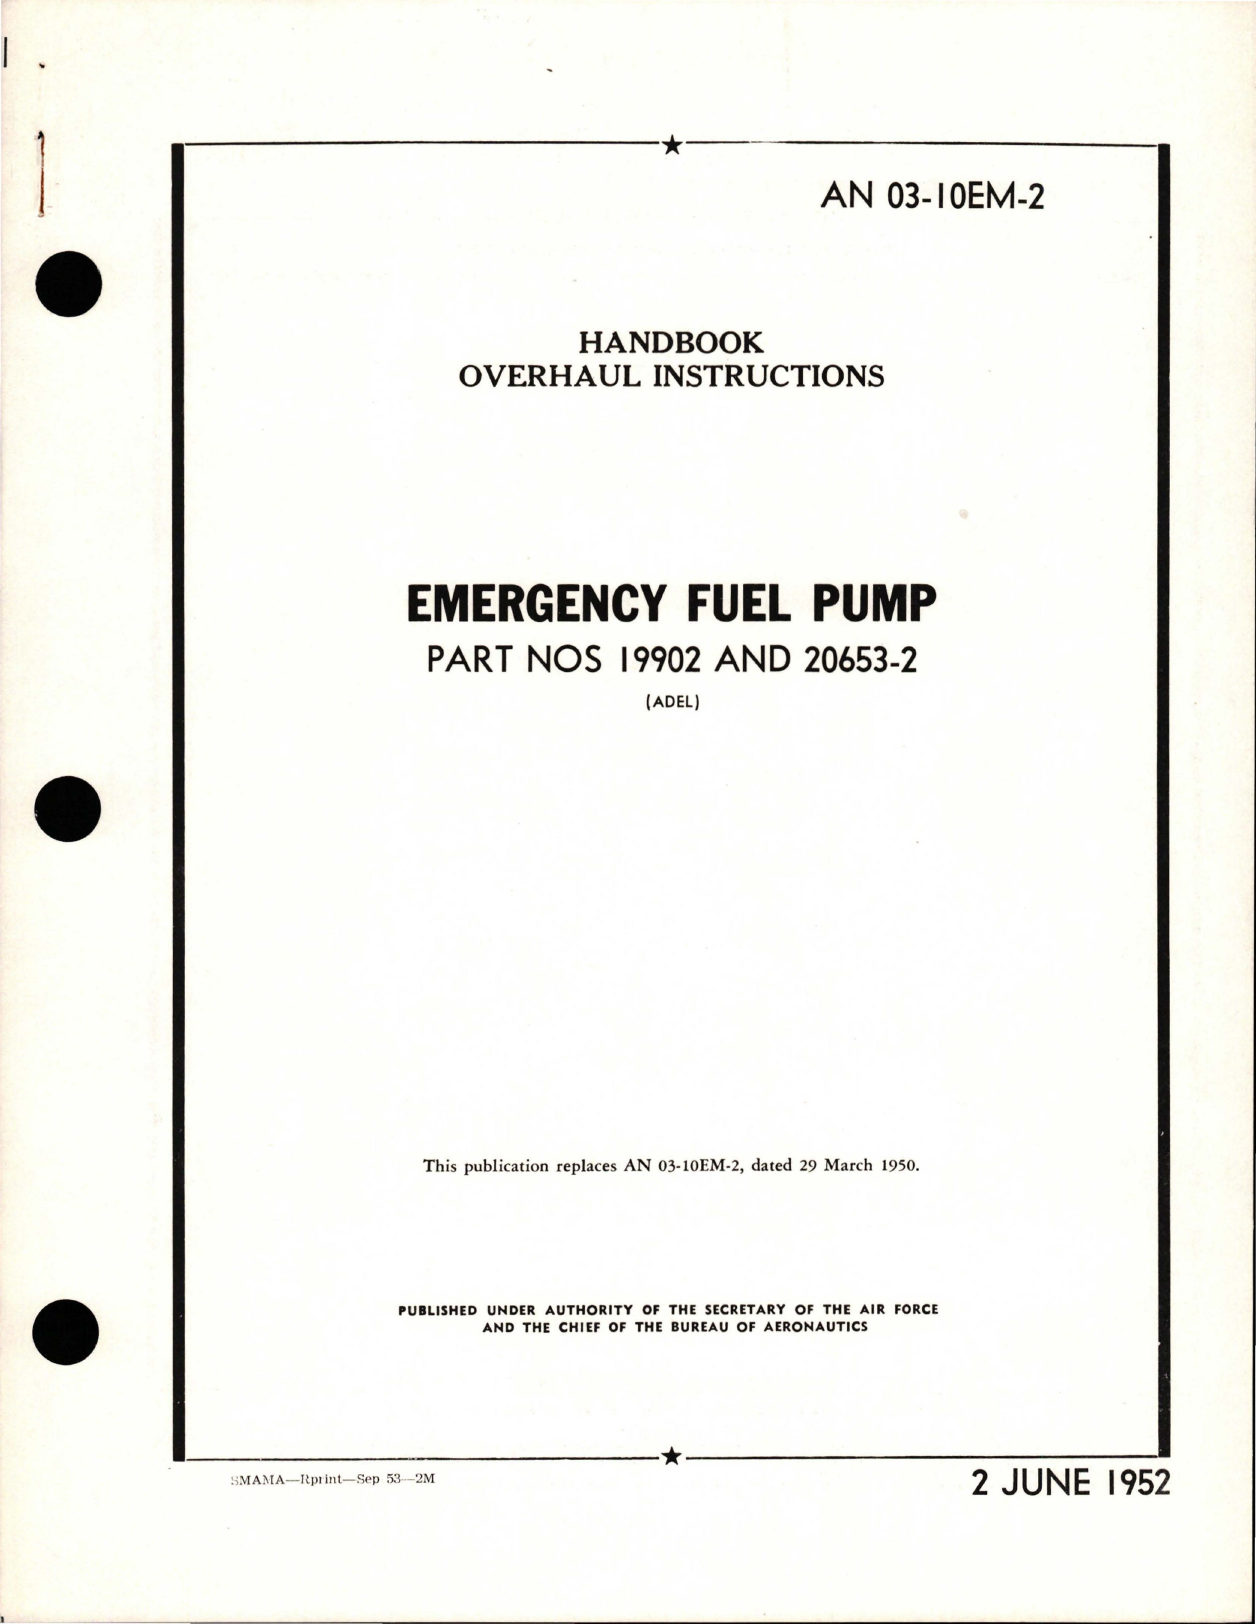 Sample page 1 from AirCorps Library document: Overhaul Instructions for Emergency Fuel Pump - Part 19902 and 20653-2 